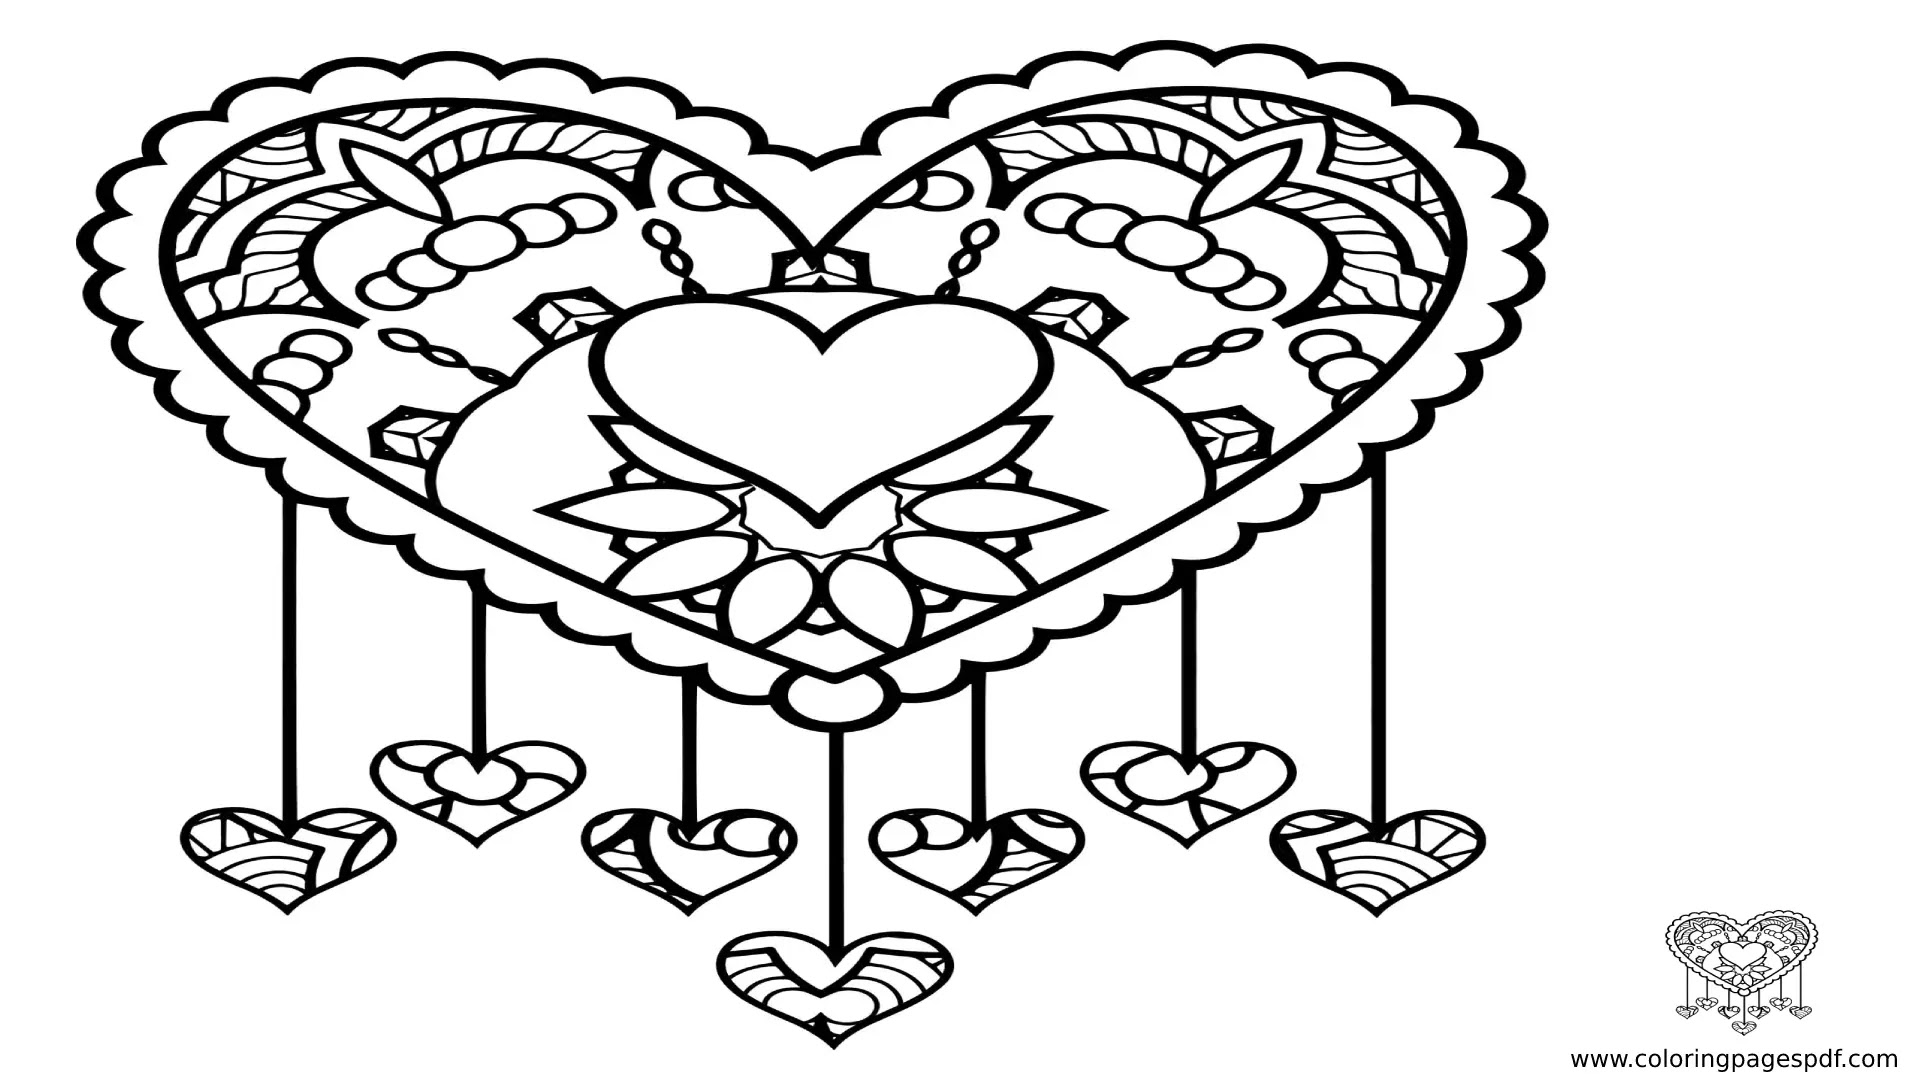 Coloring Pages Of A Heart Accessory Mandala